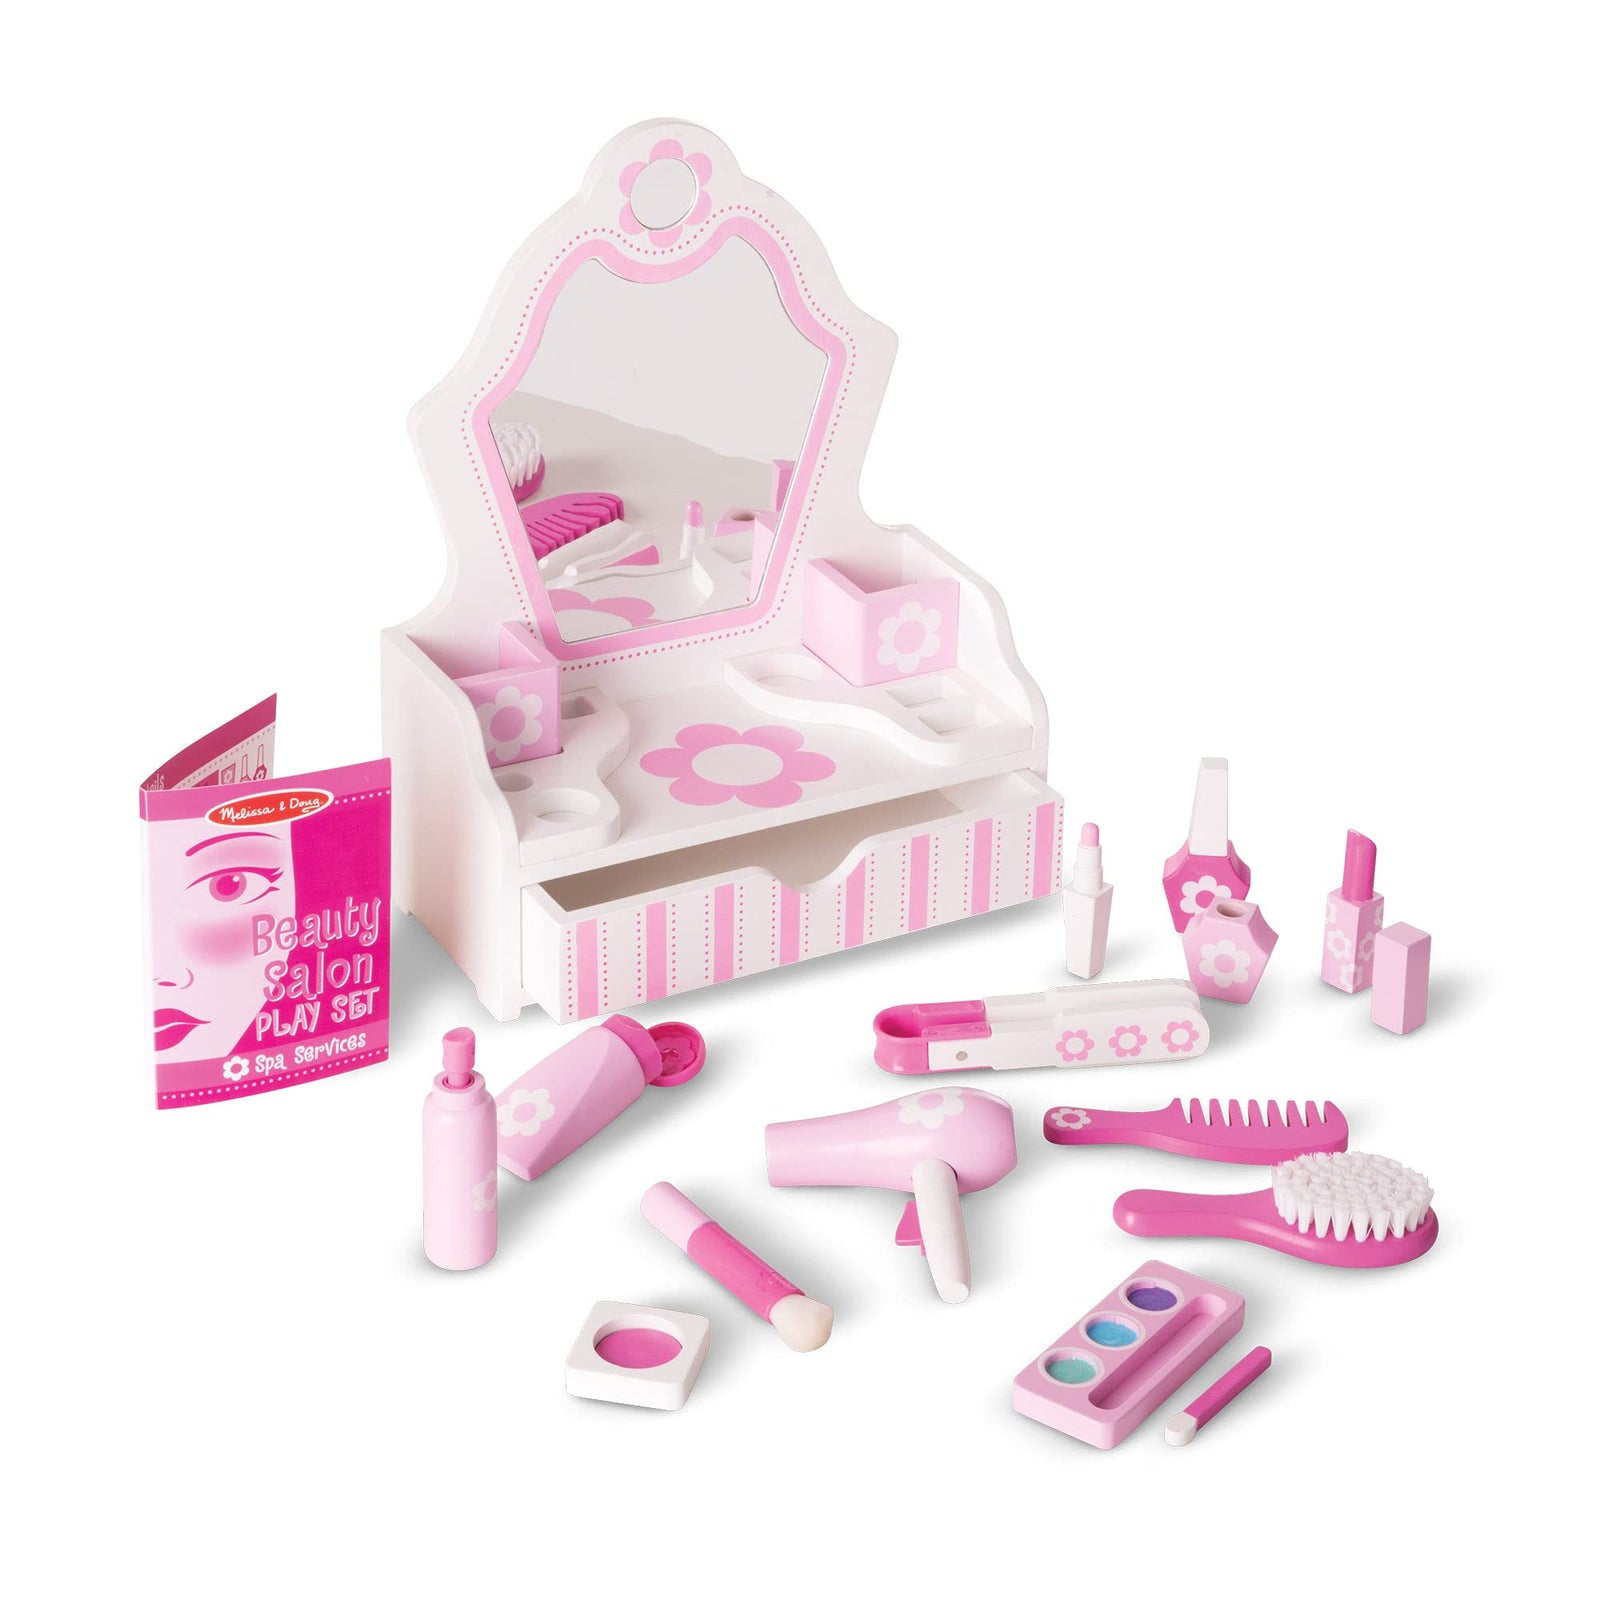 Melissa & Doug Wooden Beauty Salon Play Set With Vanity and Accessories (18 pcs)